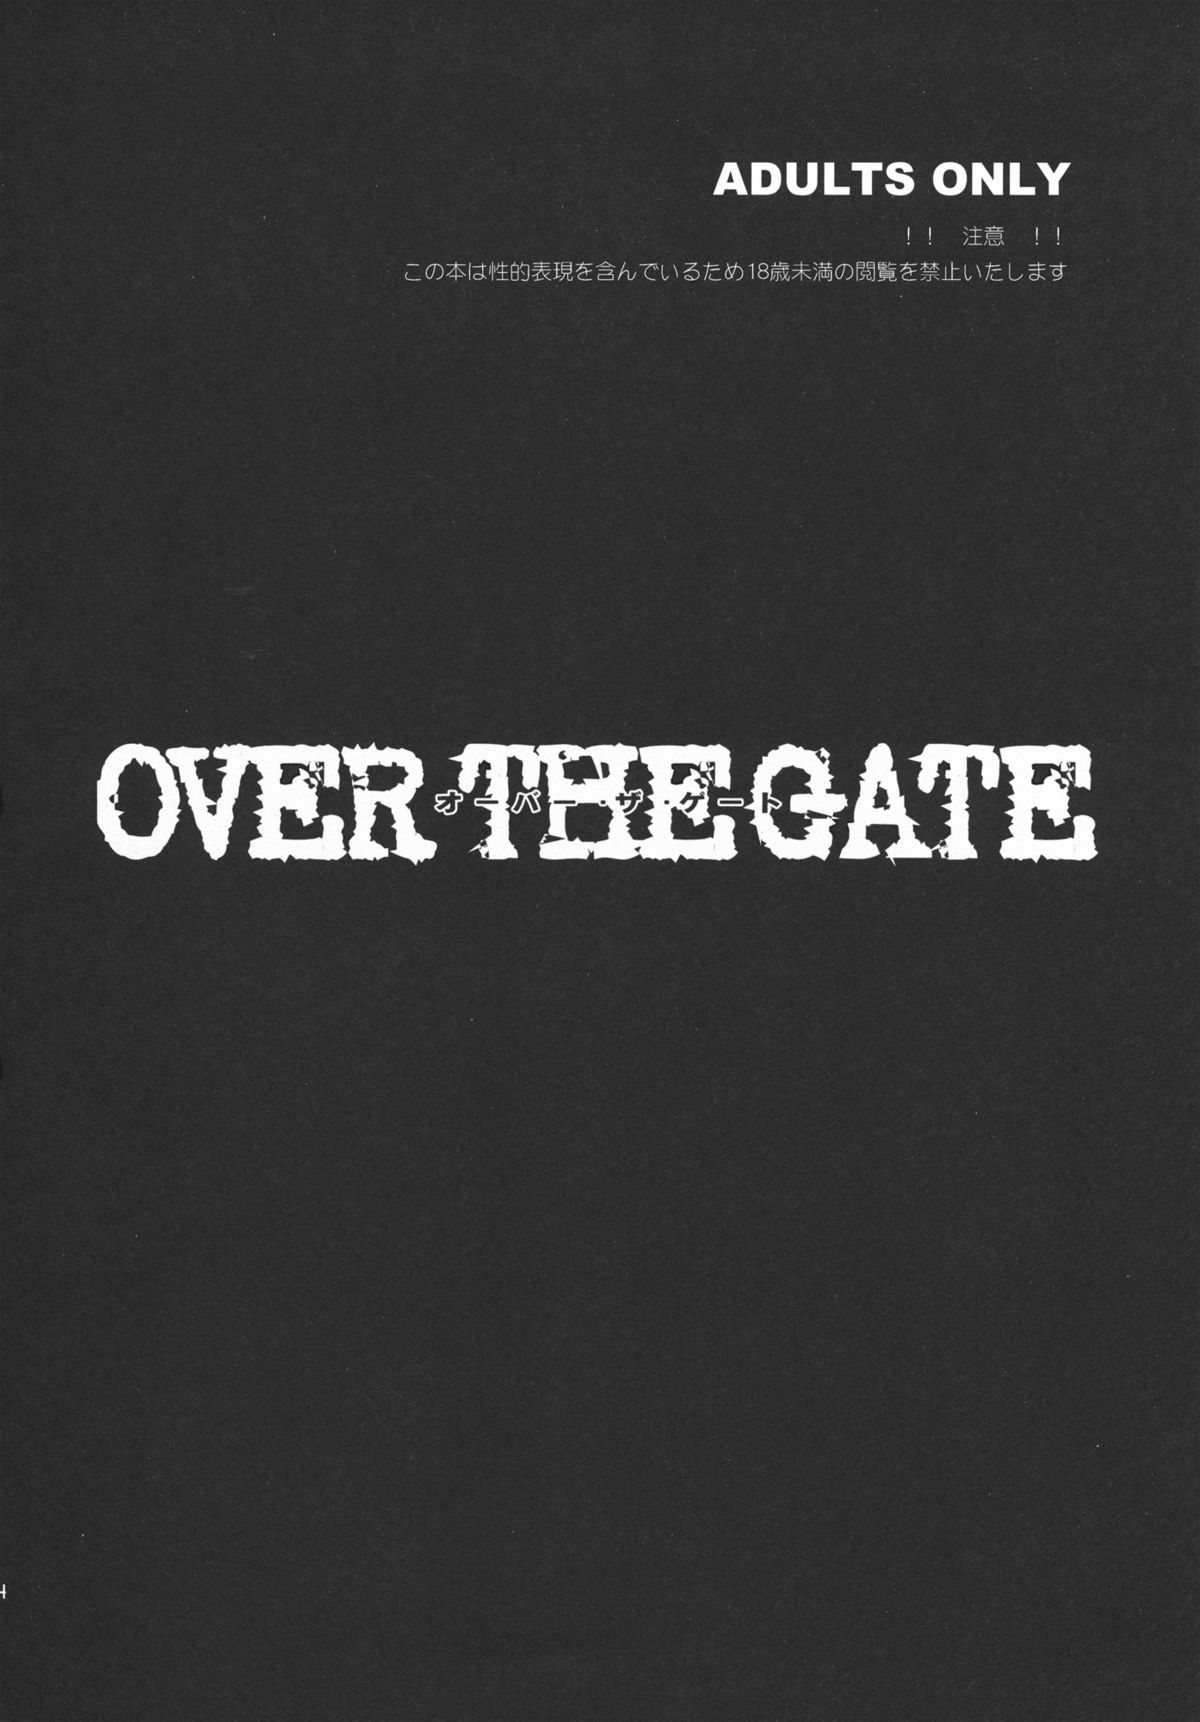 (C80) [トッドスペシャル] OVER THE GATE (Steins;Gate)